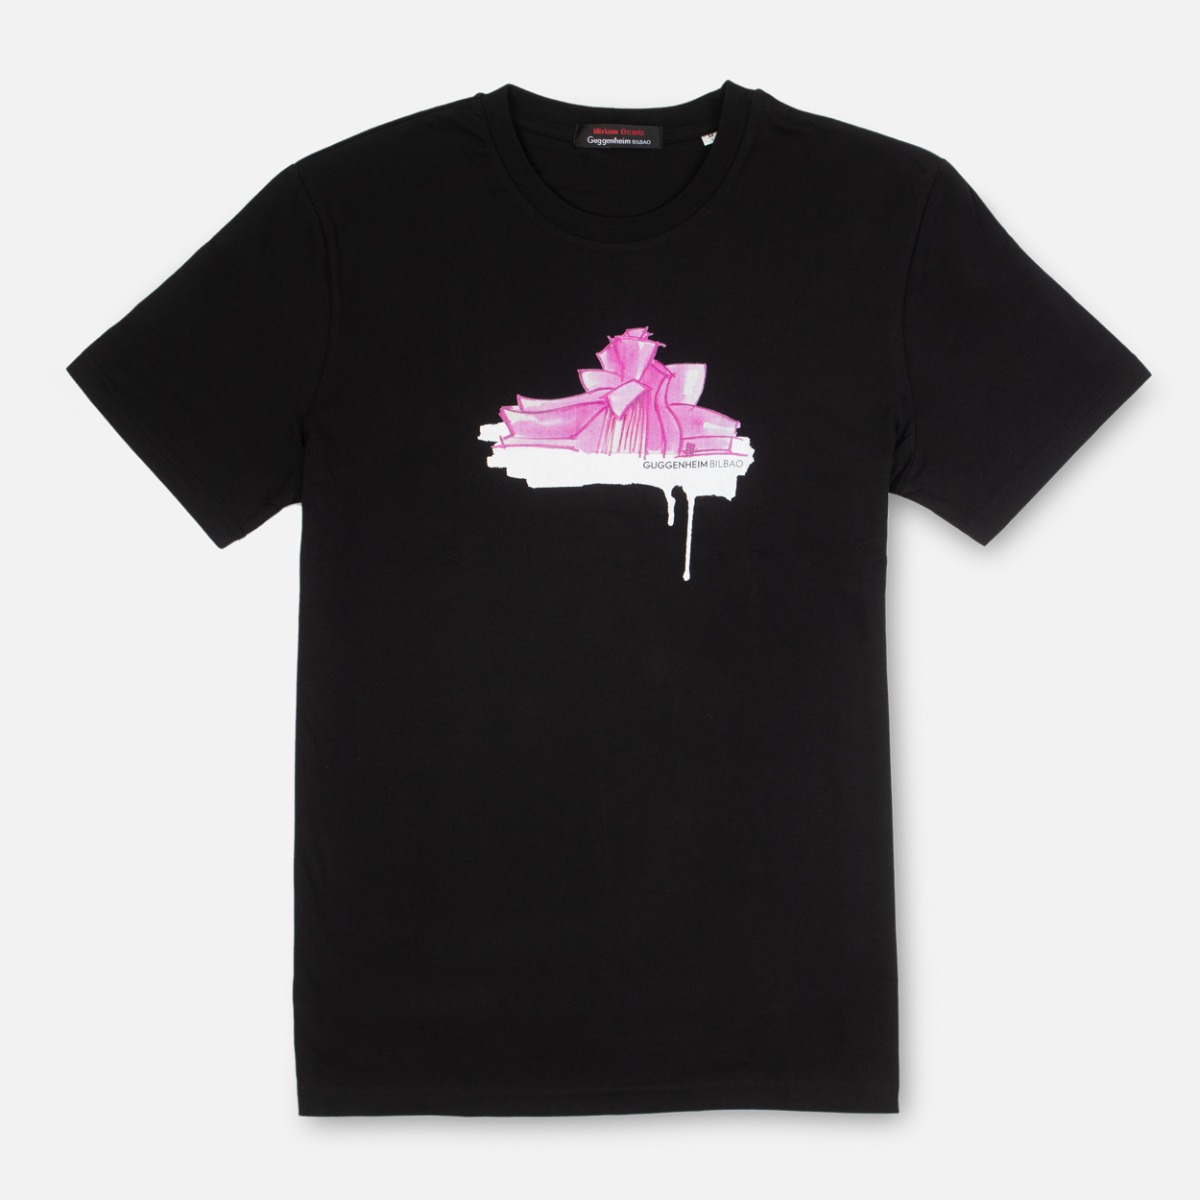 T-Shirt with pink/white Museum Building Silhouette